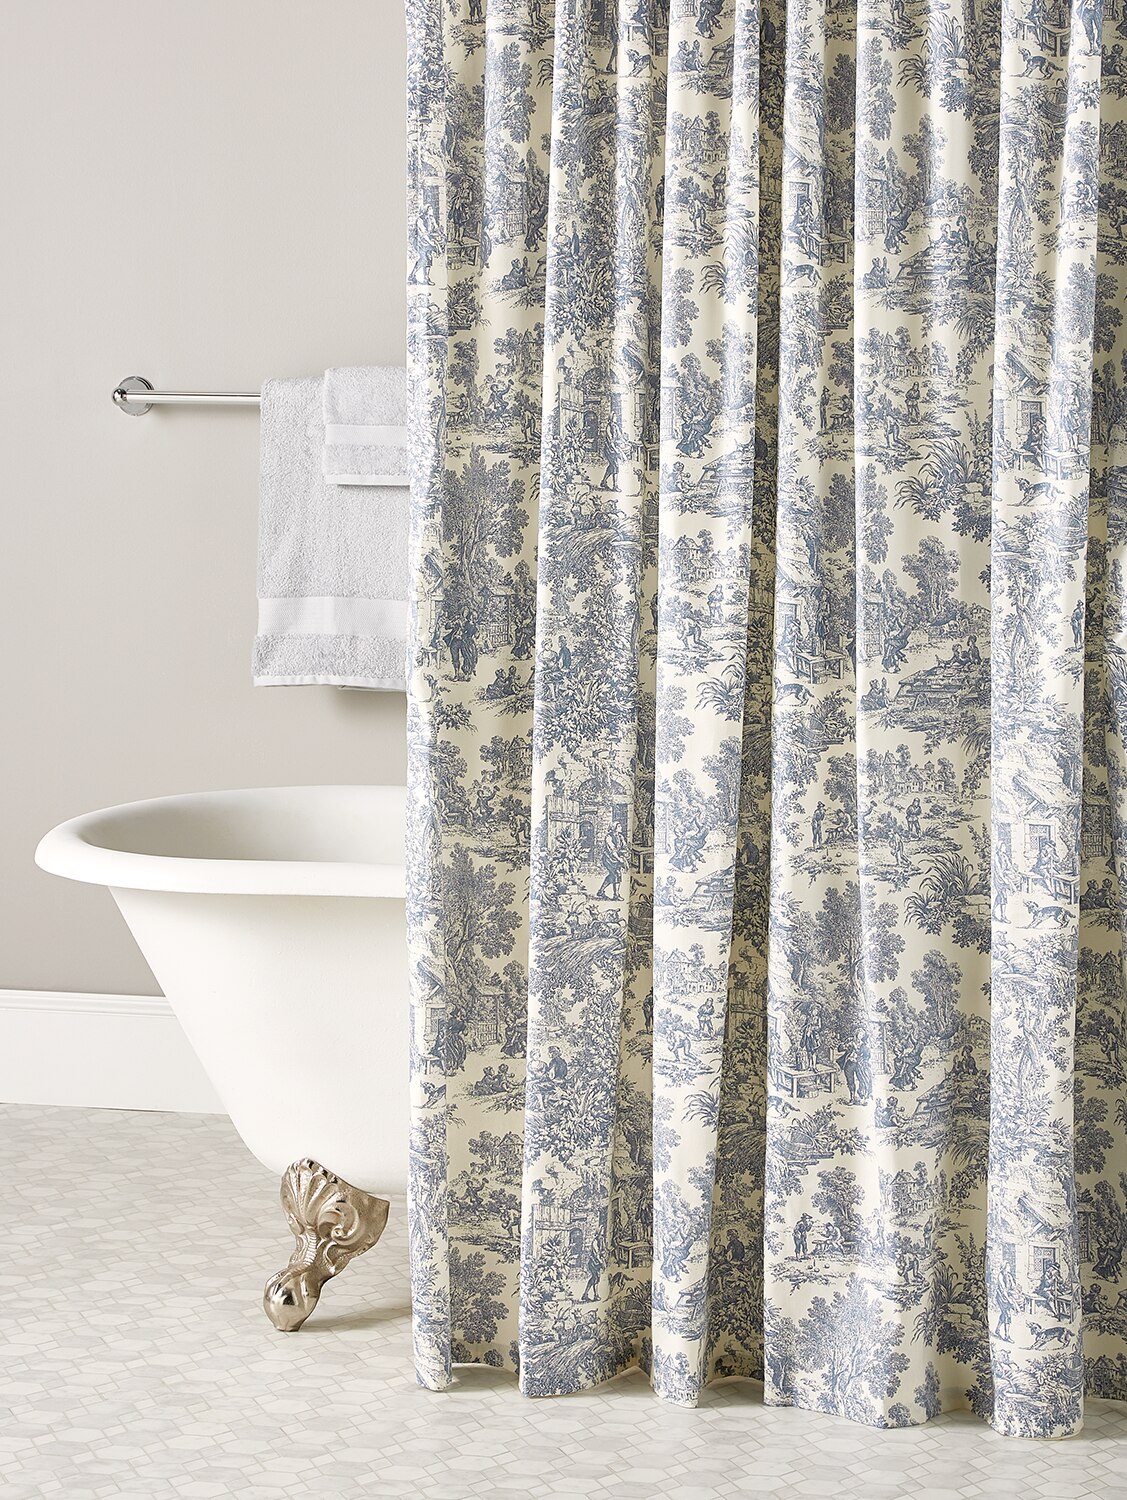 French Toile Patterned Shower Curtain, Yellow Toile Shower Curtain